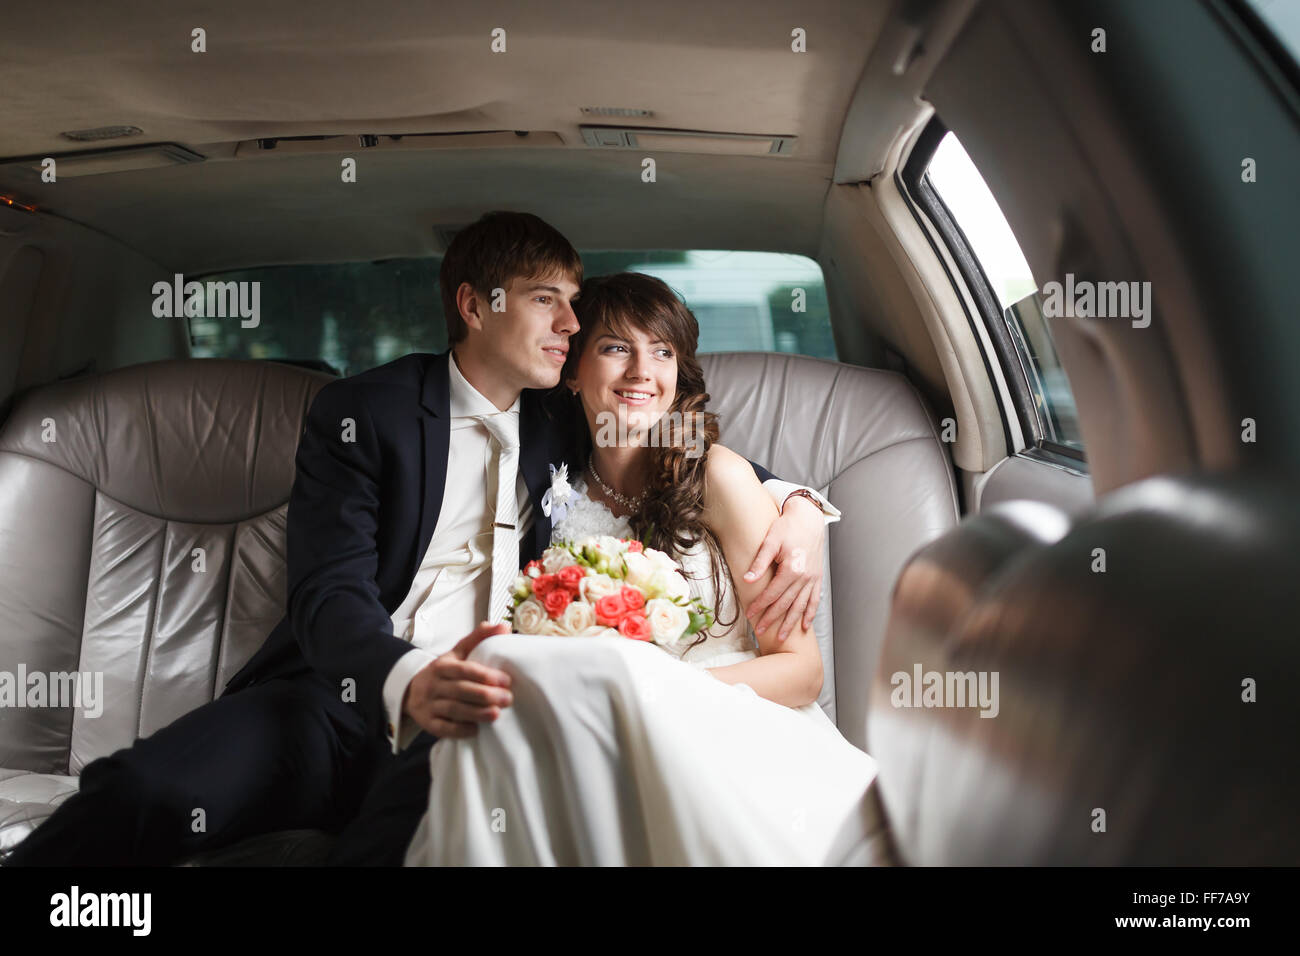 Happy bride and groom embracing sitting in the car Stock Photo